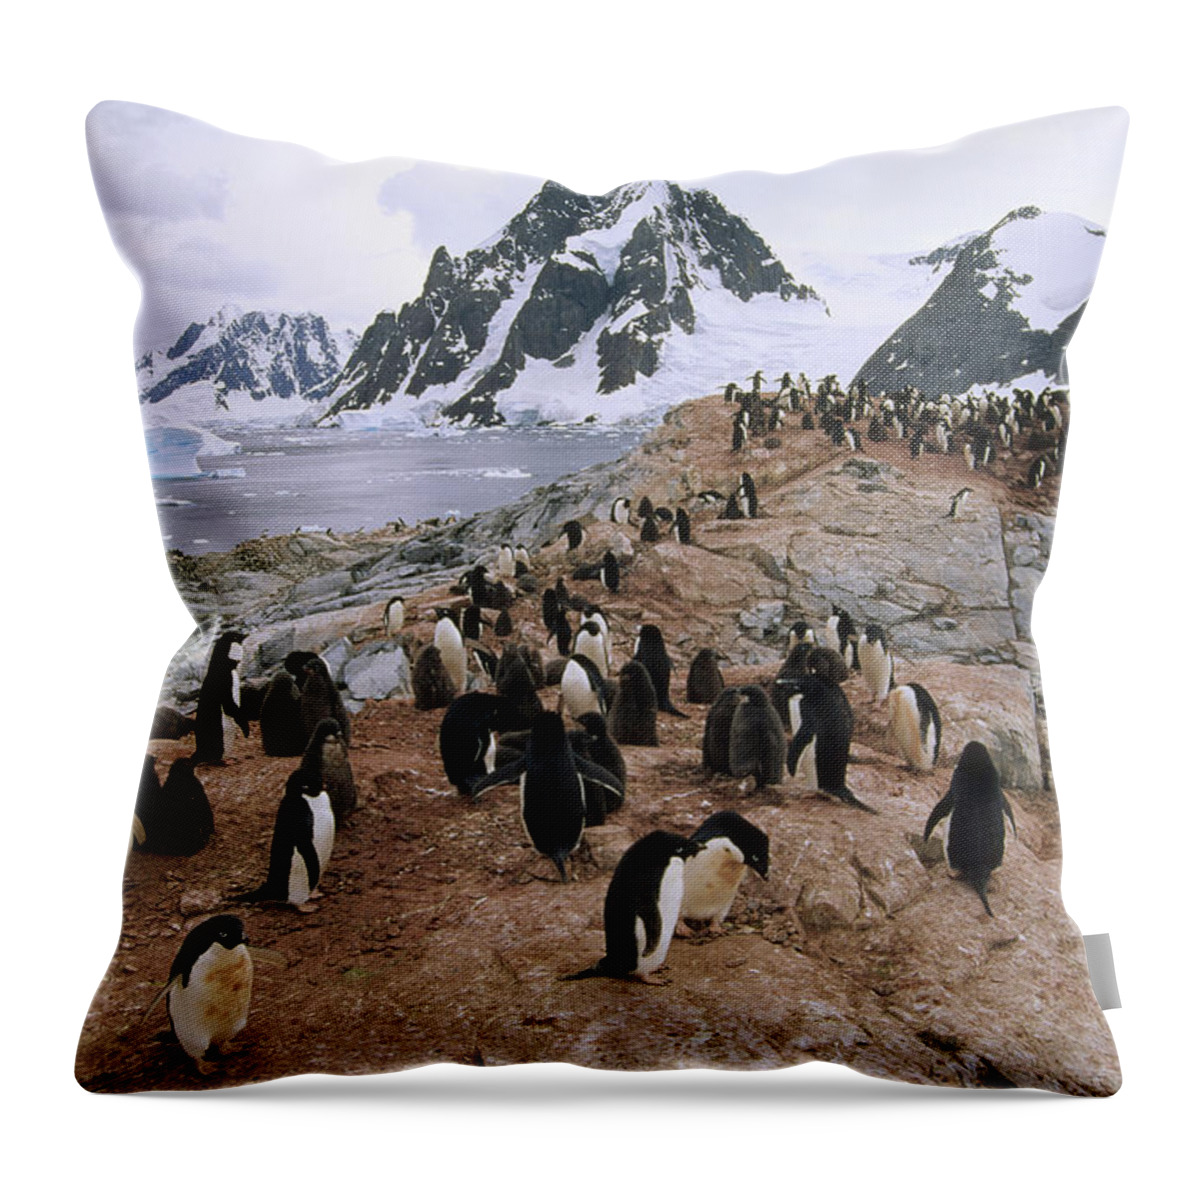 Feb0514 Throw Pillow featuring the photograph Adelie Penguin Rookery Petermann Island by Tui De Roy